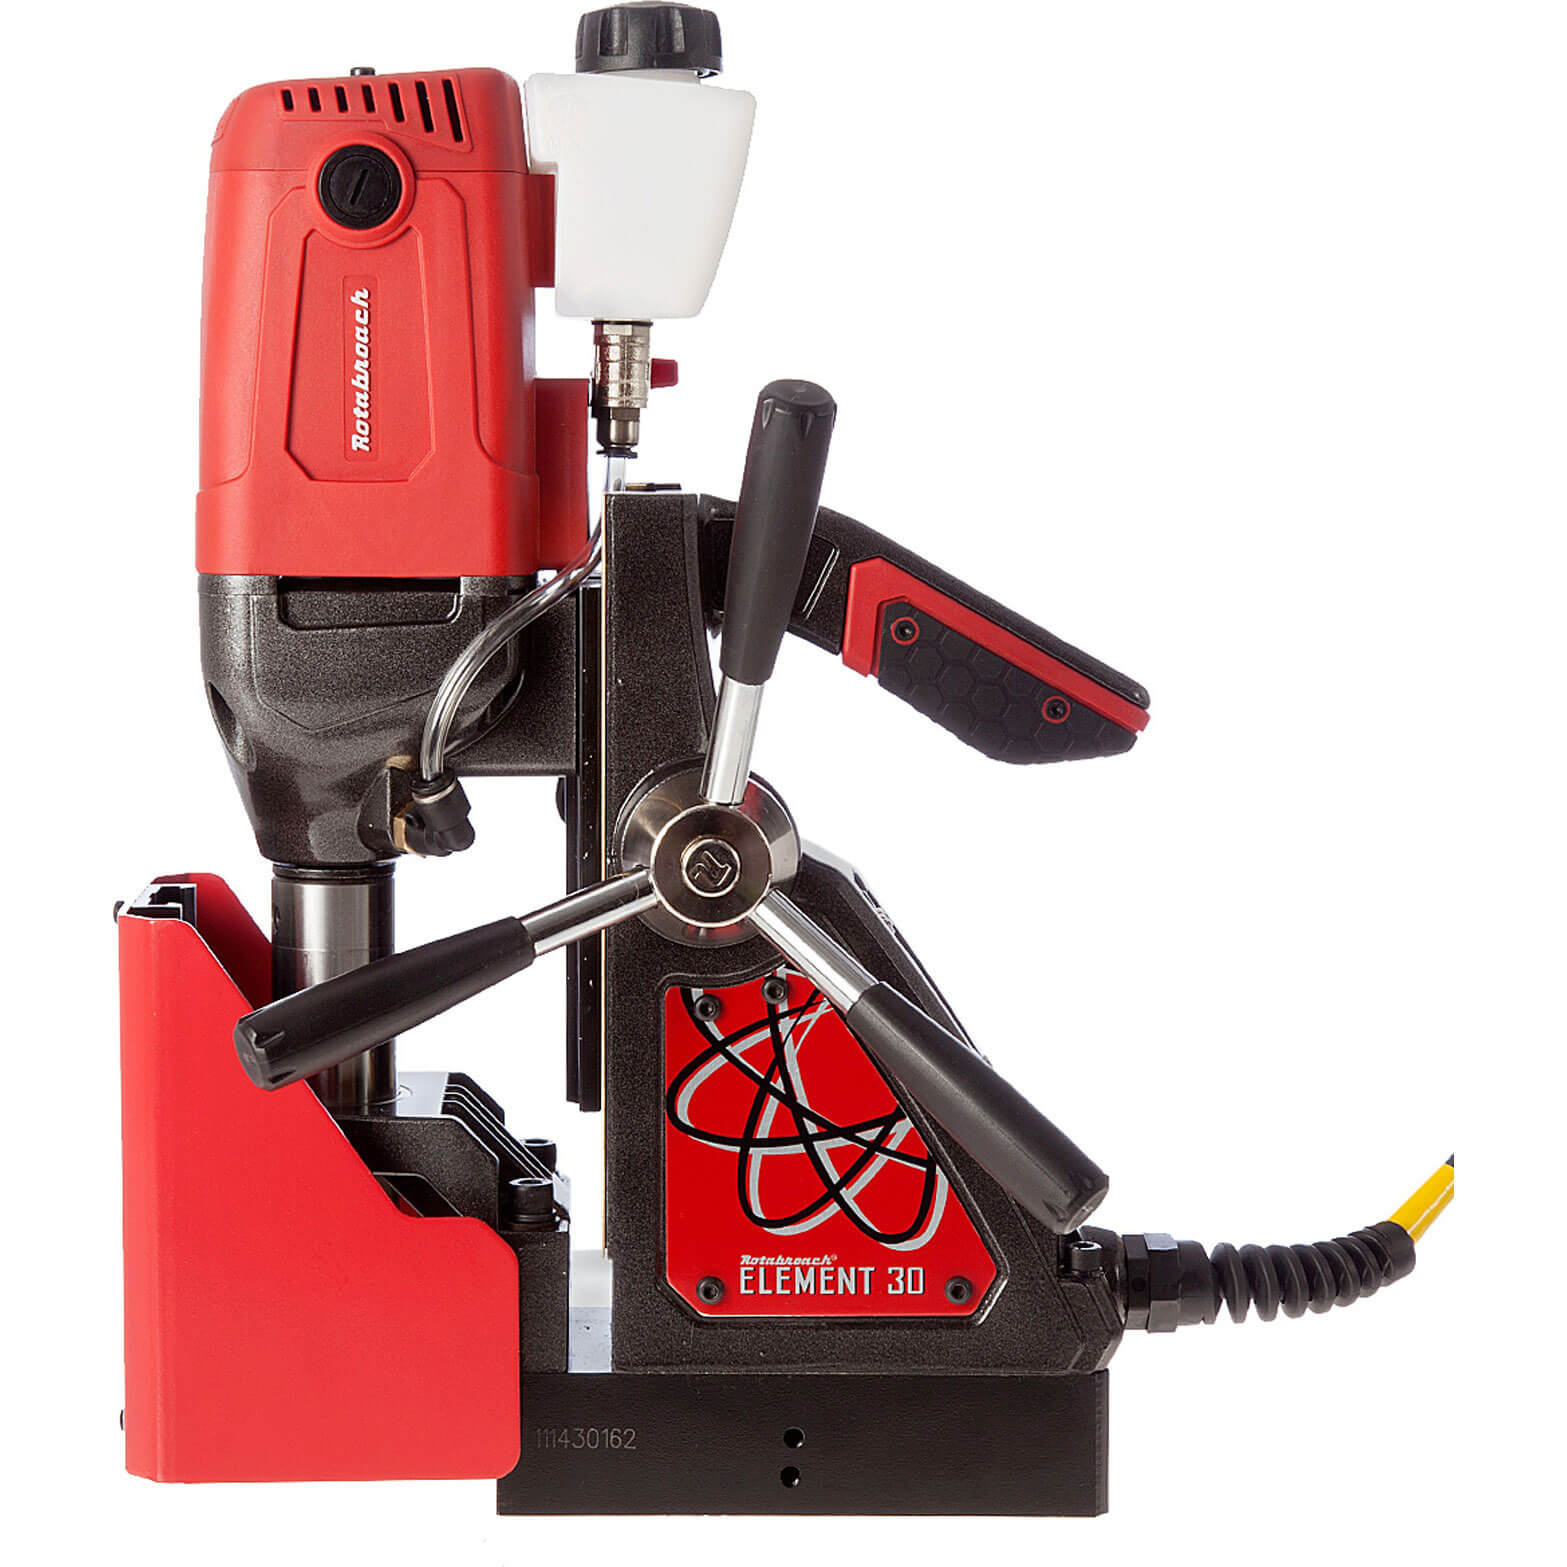 Image of Rotabroach Element 30 Magnetic Drilling Machine 110v